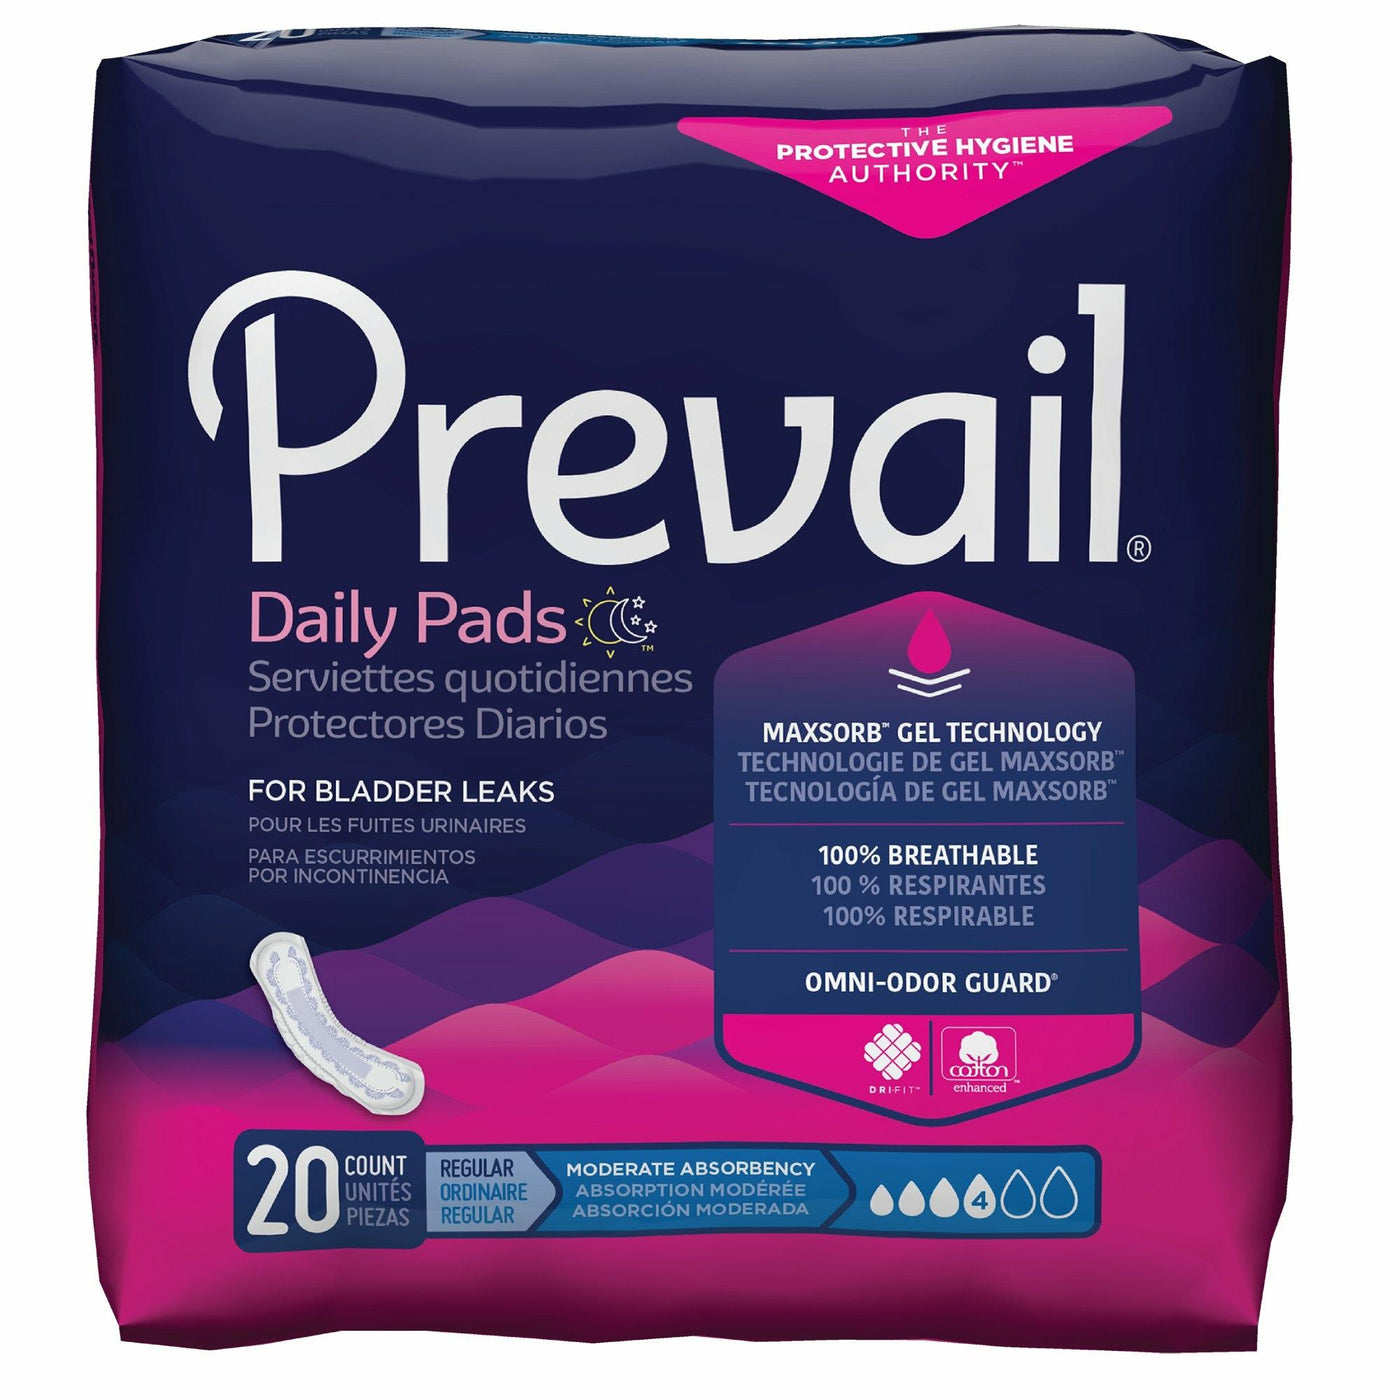 Poise Daily Incontinence Panty Liners - Very Light Absorbency : Target